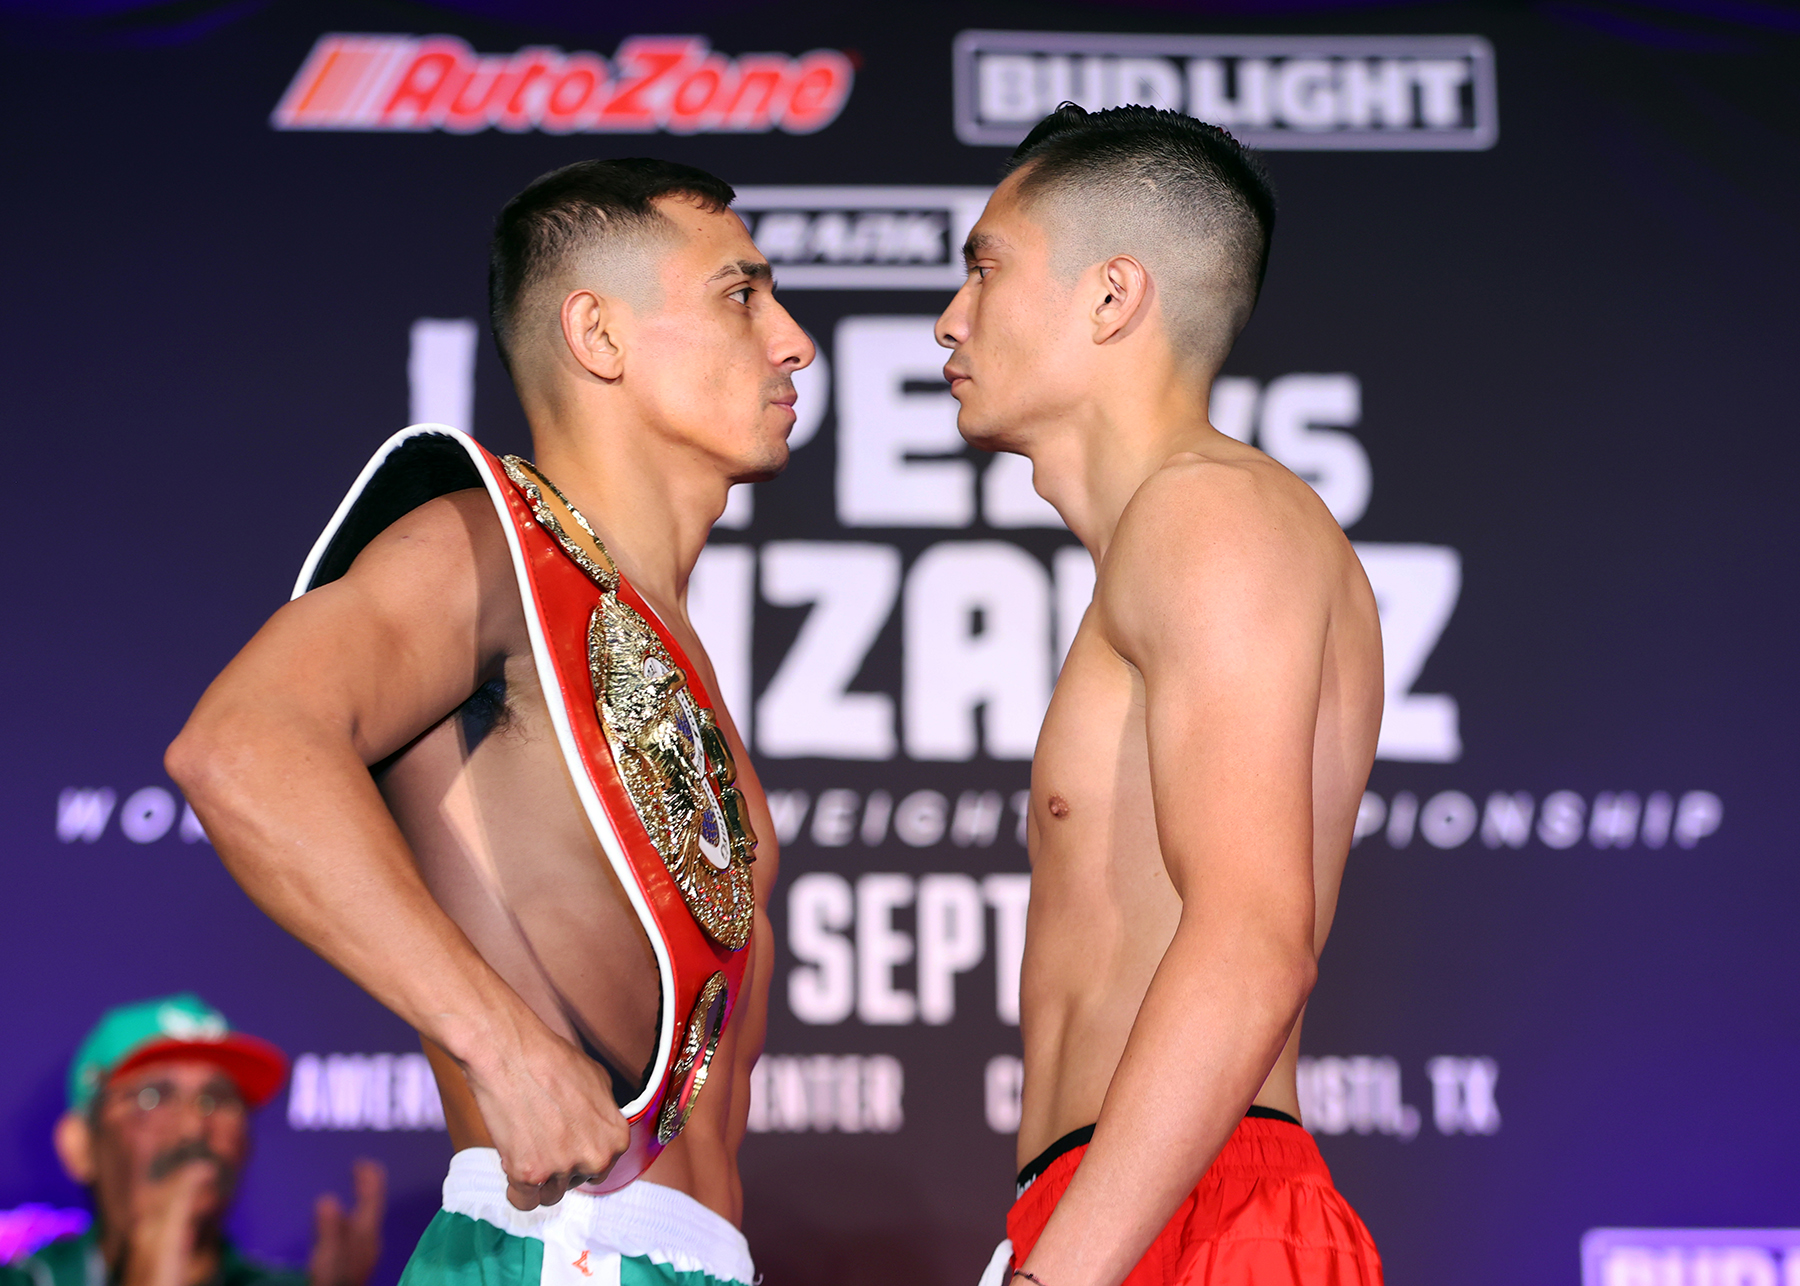 Lopez vs. Gonzalez: Weigh-In Results & Betting Odds